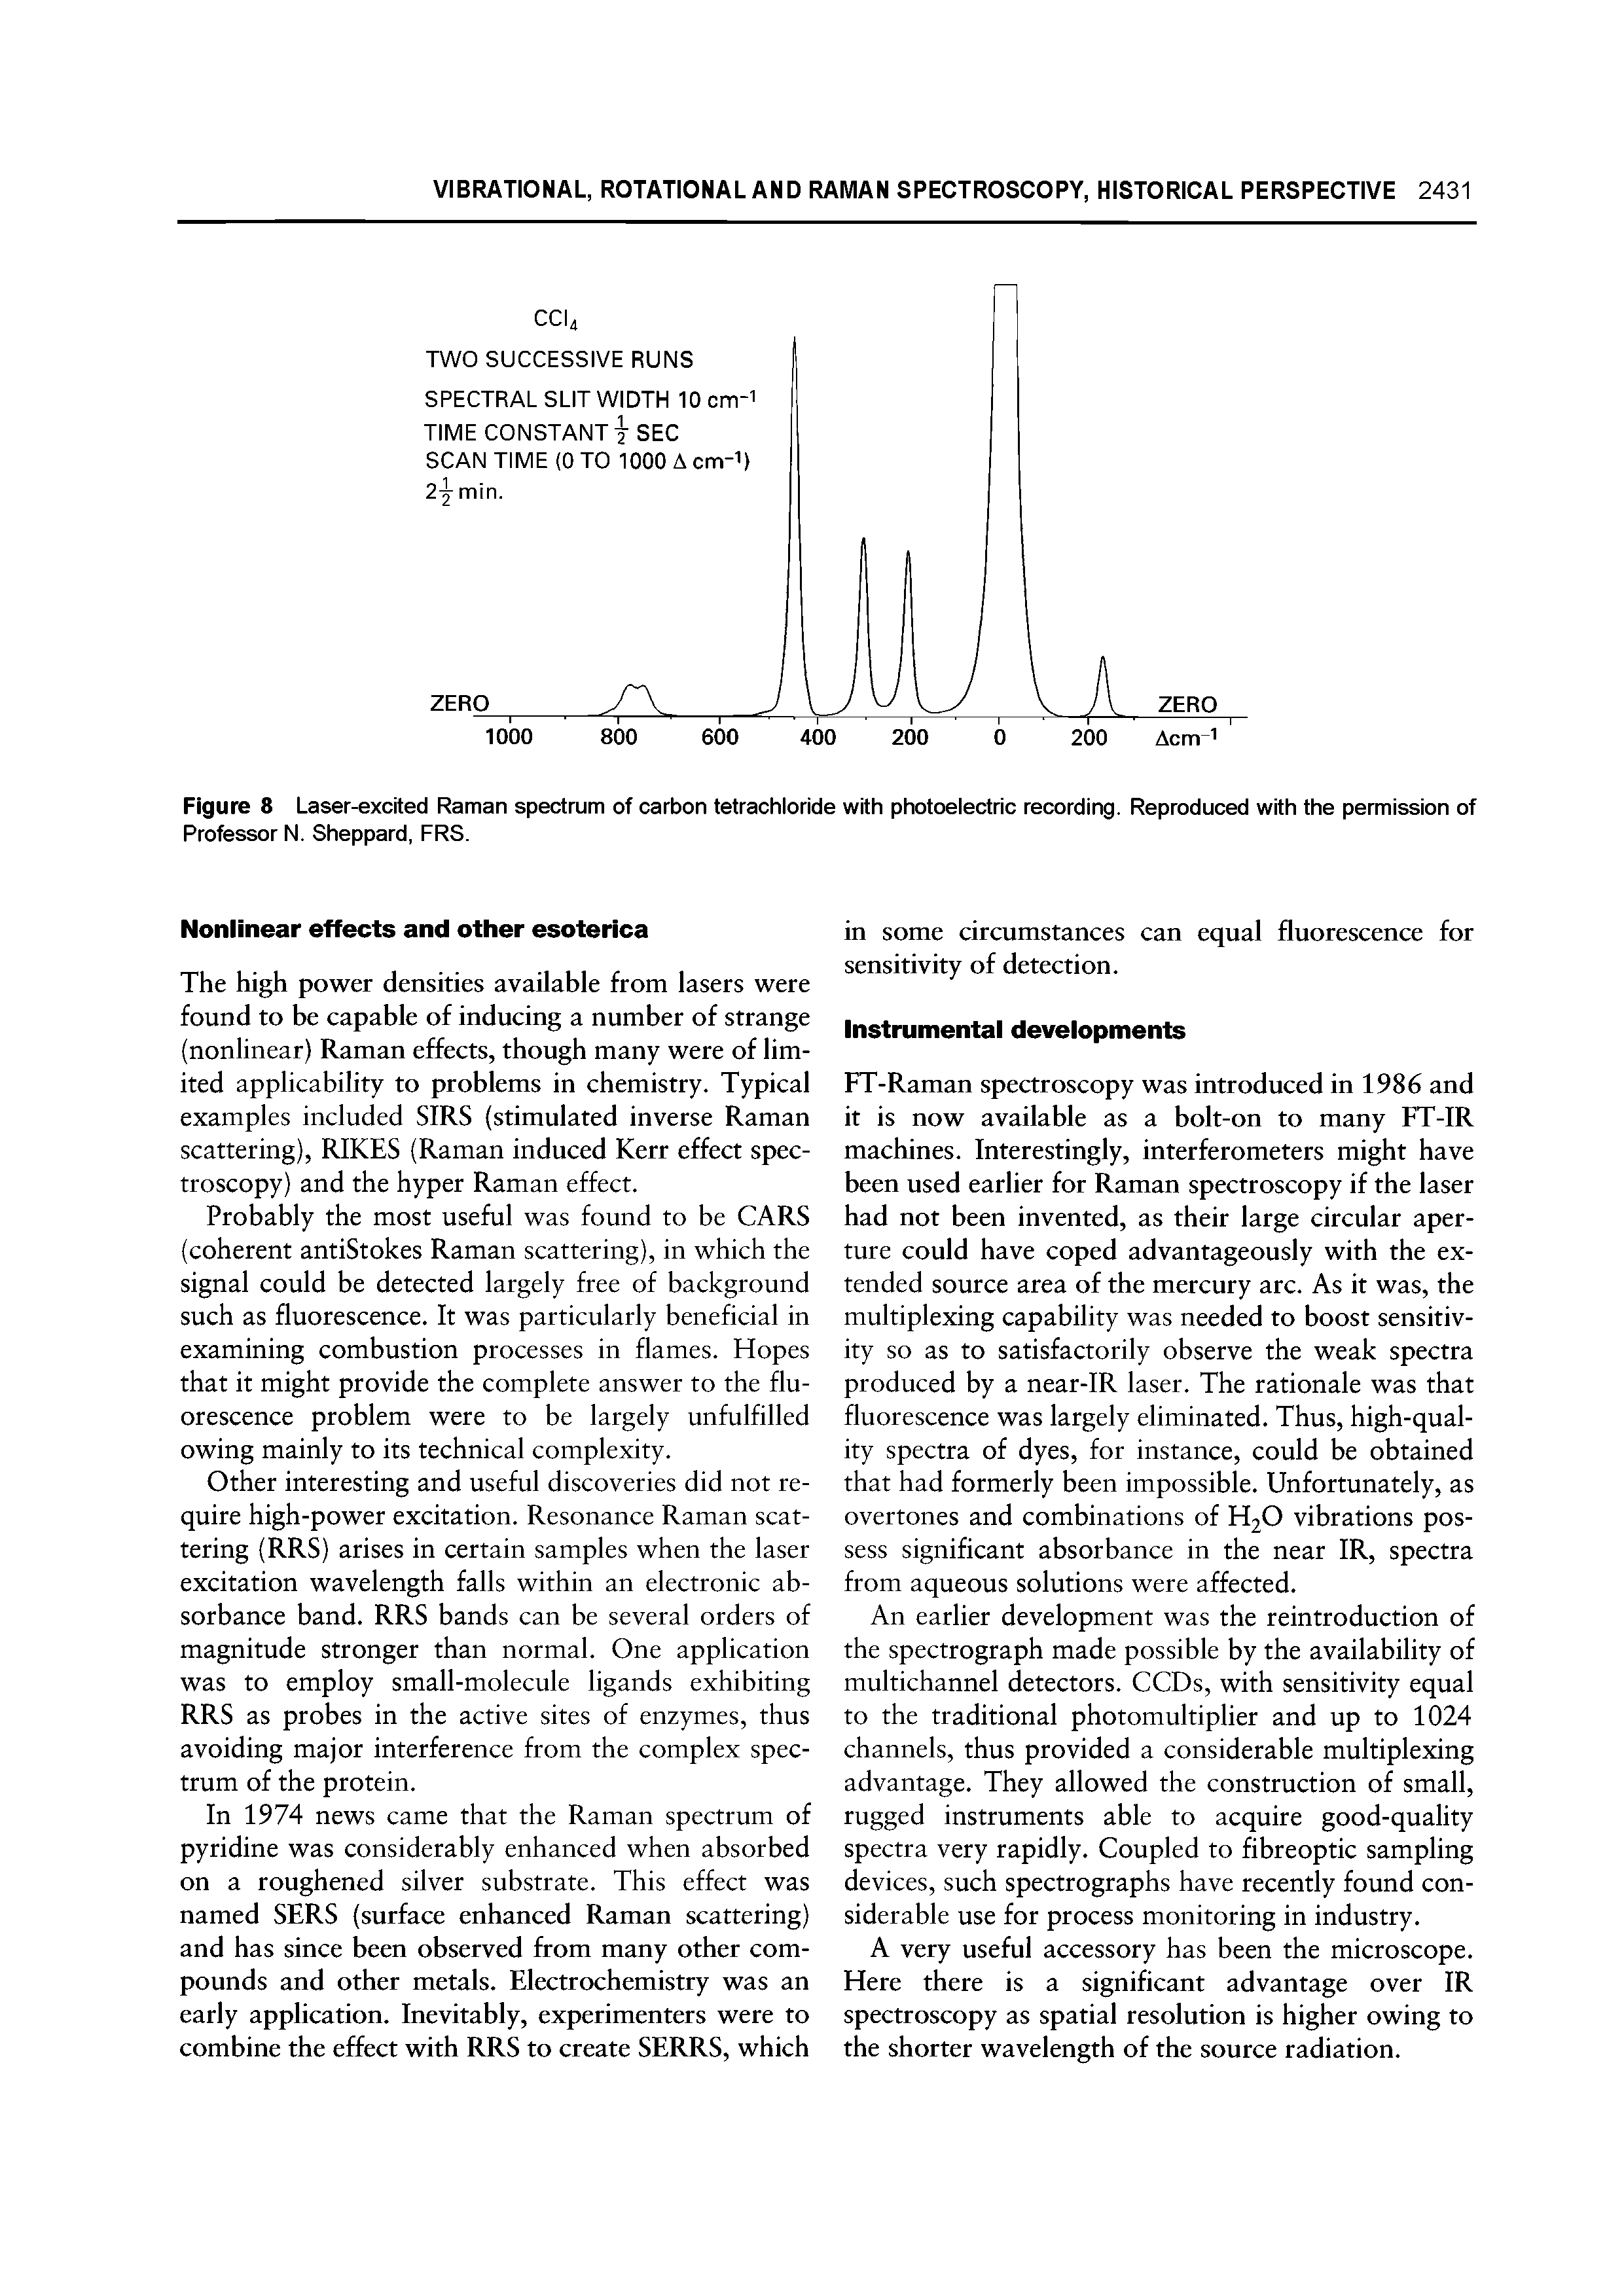 Figure 8 Laser-excited Raman spectrum of carbon tetrachloride with photoelectric recording. Reproduced with the permission of Professor N. Sheppard, FRS.